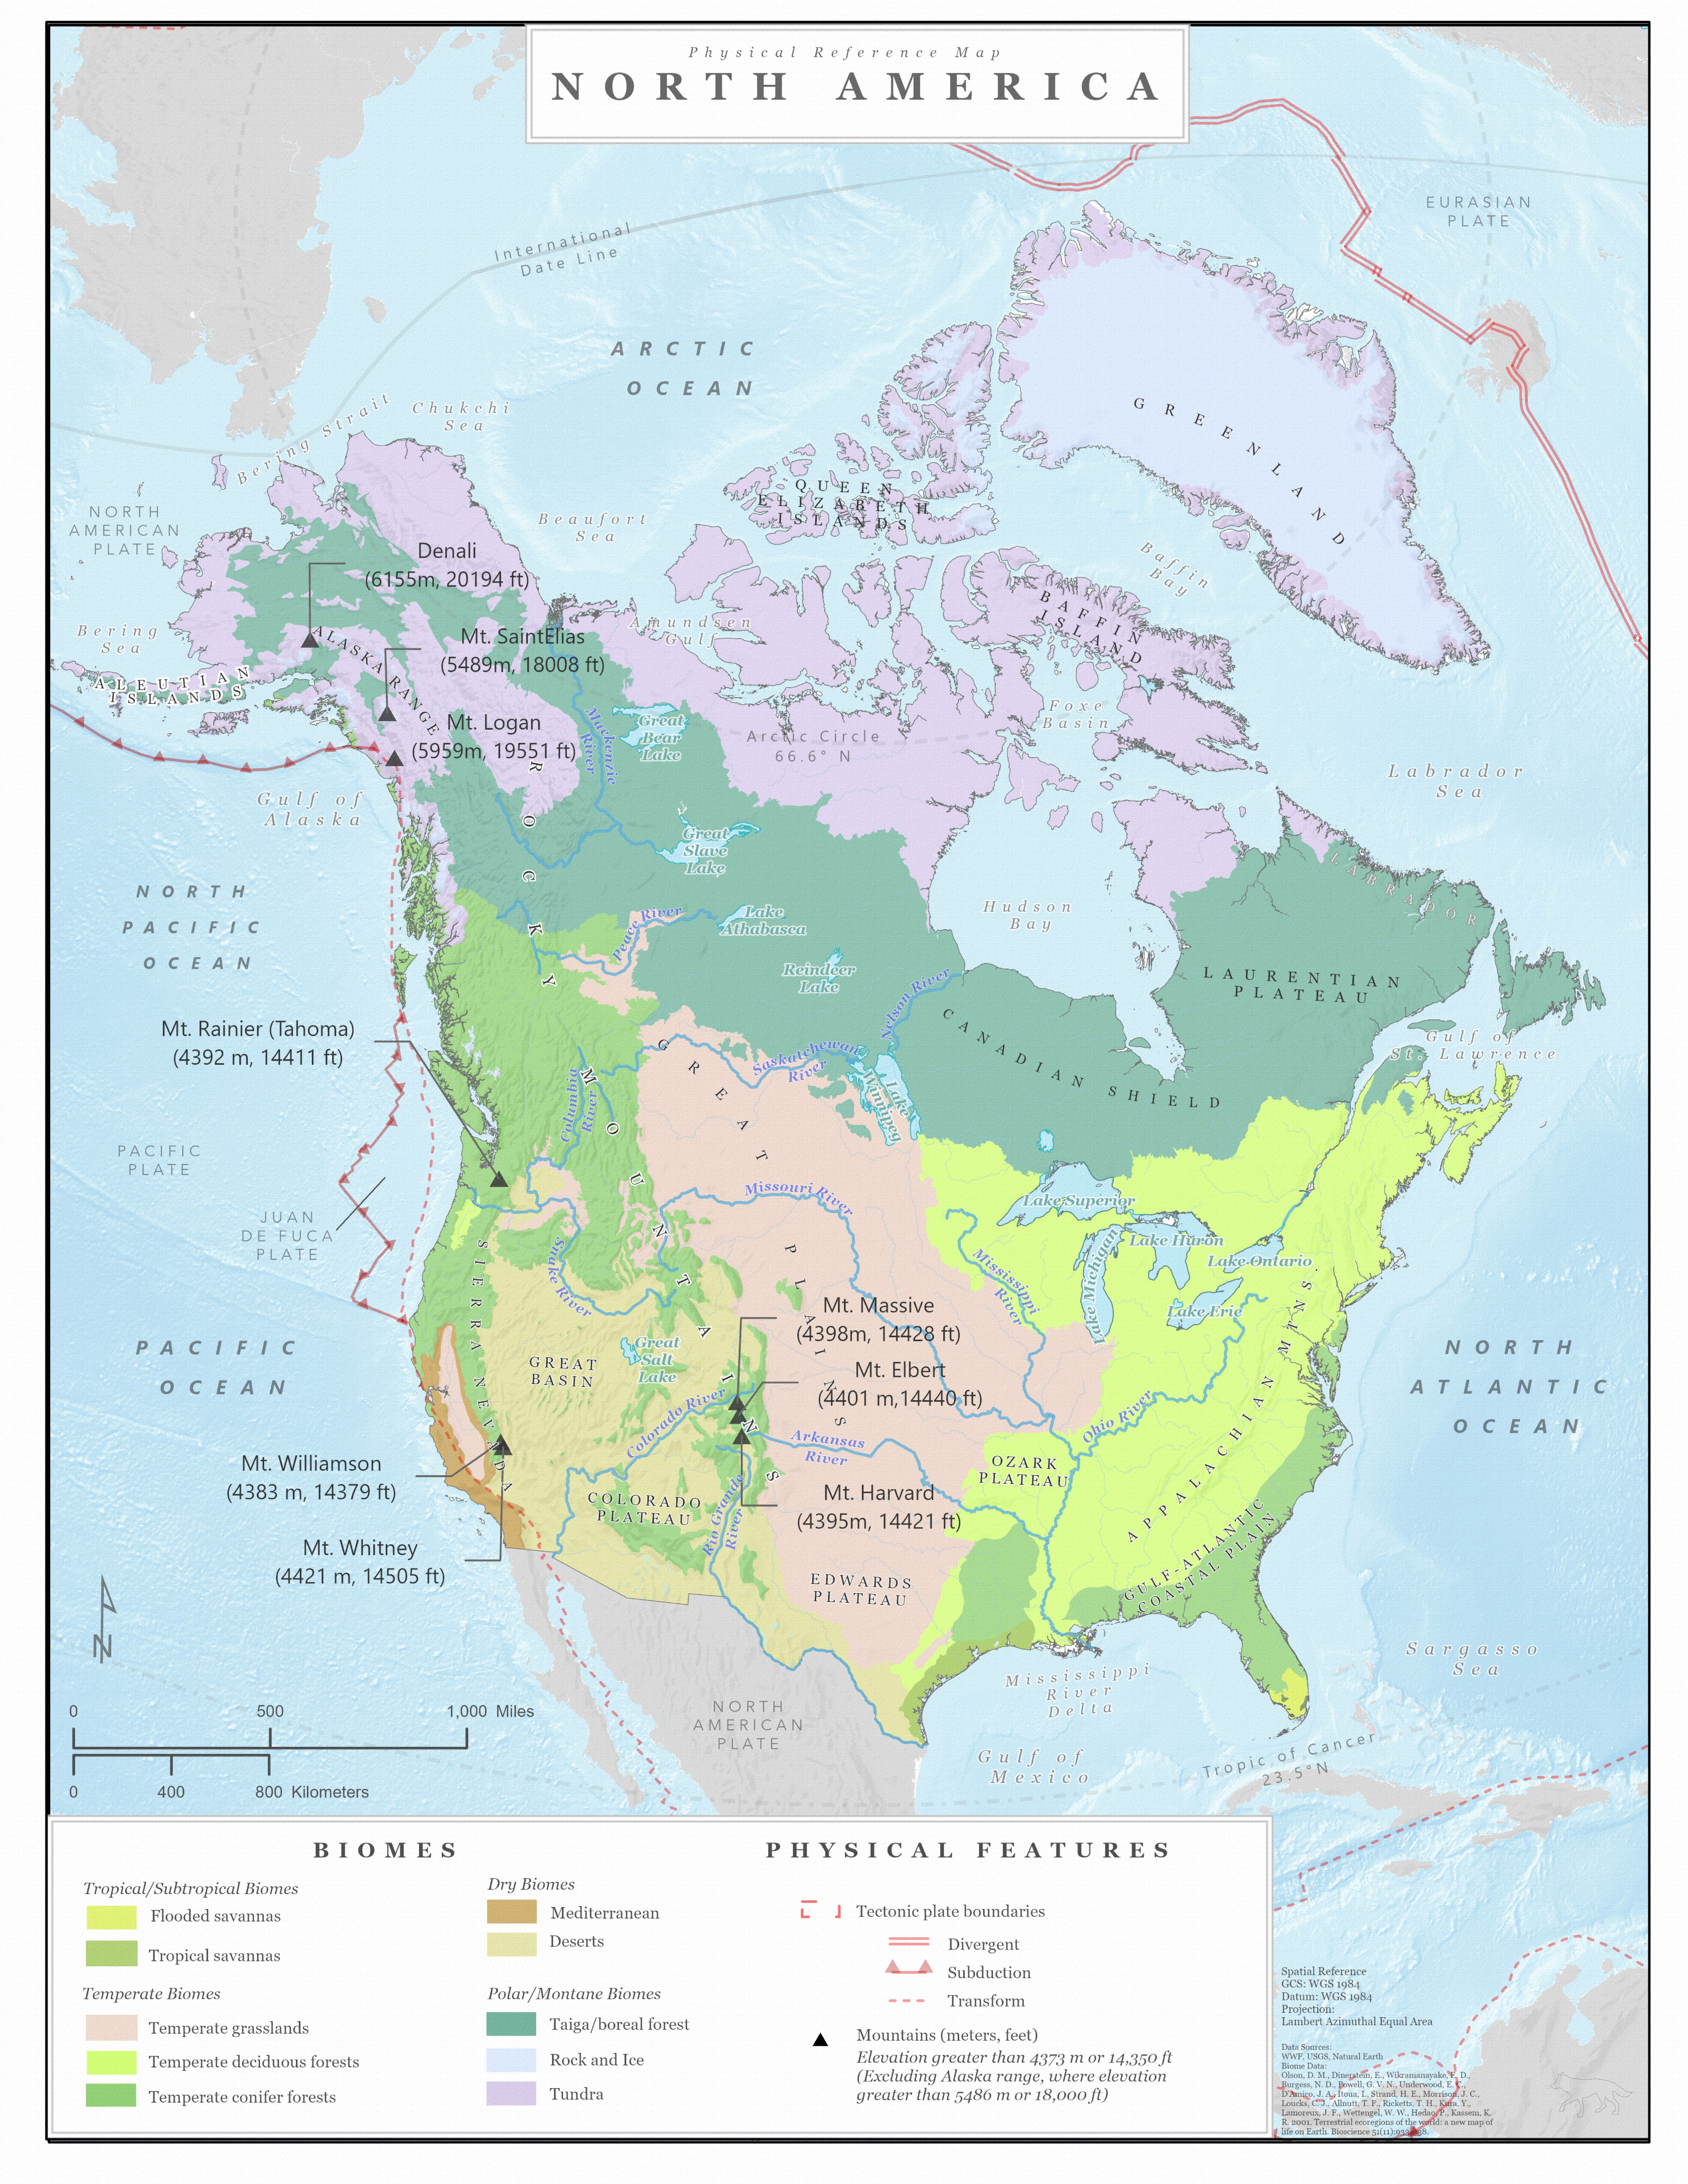 Biome and physical features map of North America